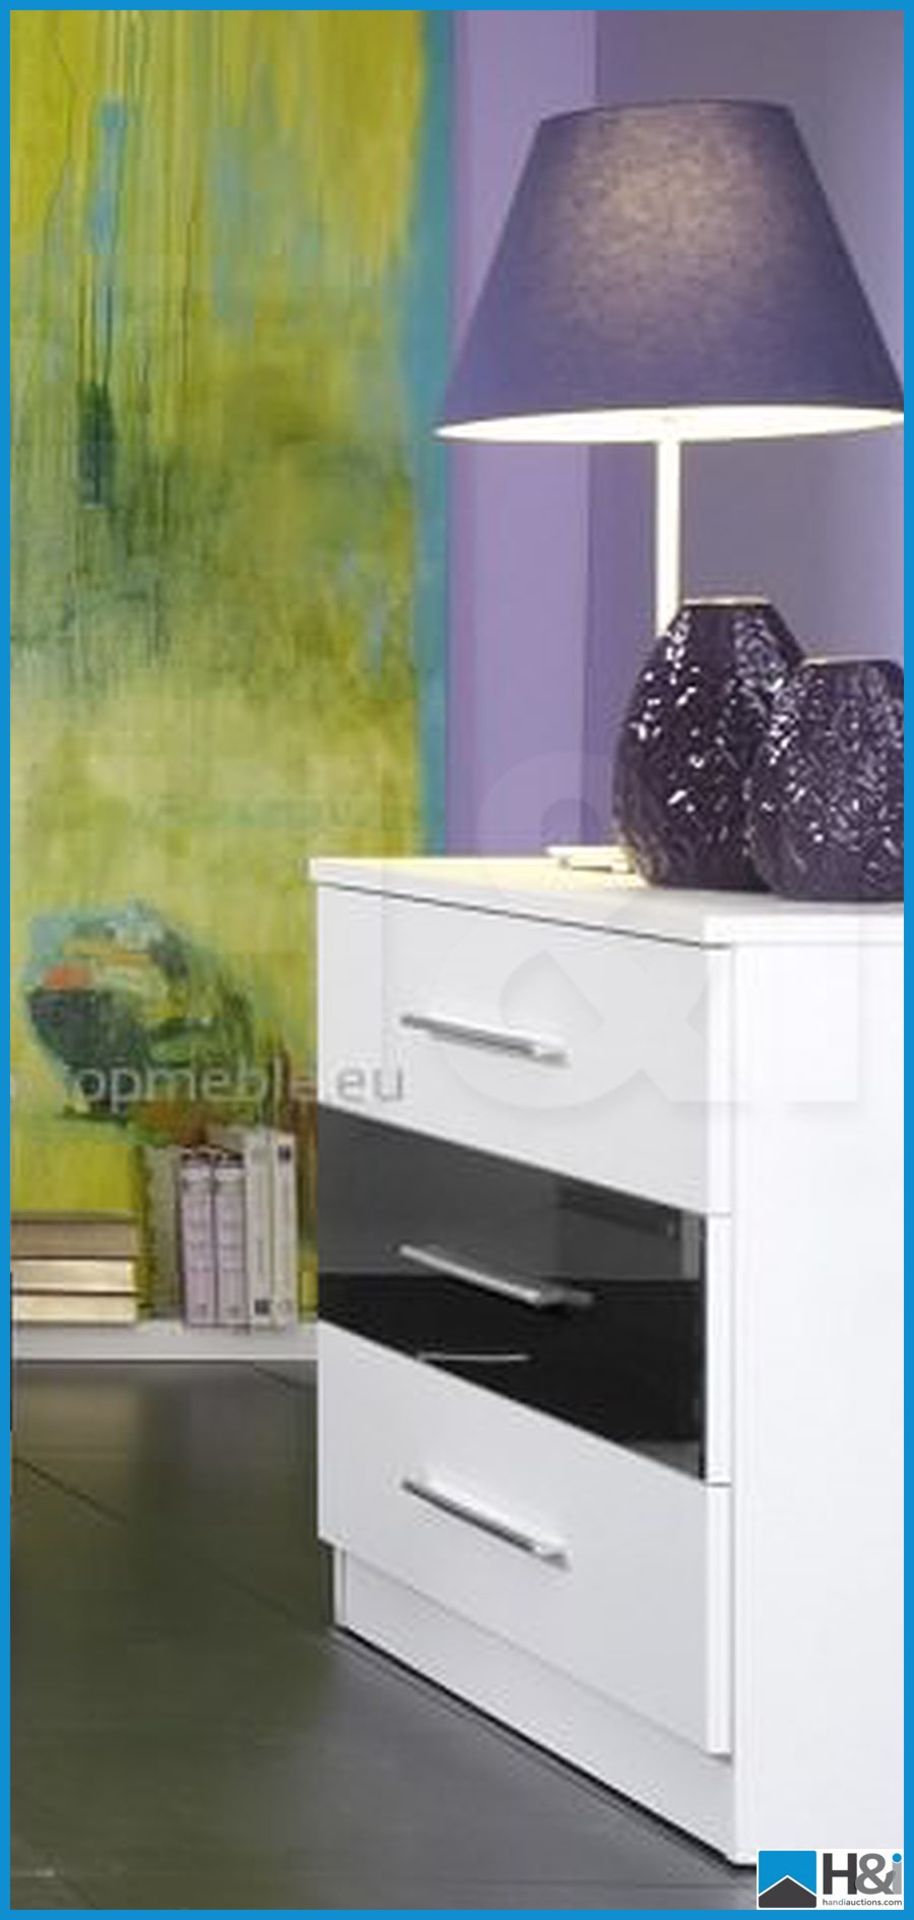 NEW IN BOX MONACO 3DRAWER CHEST [WHITE/BLACK] 72 x 90 x 43cm RRP £259 Appraisal: Viewing Essential